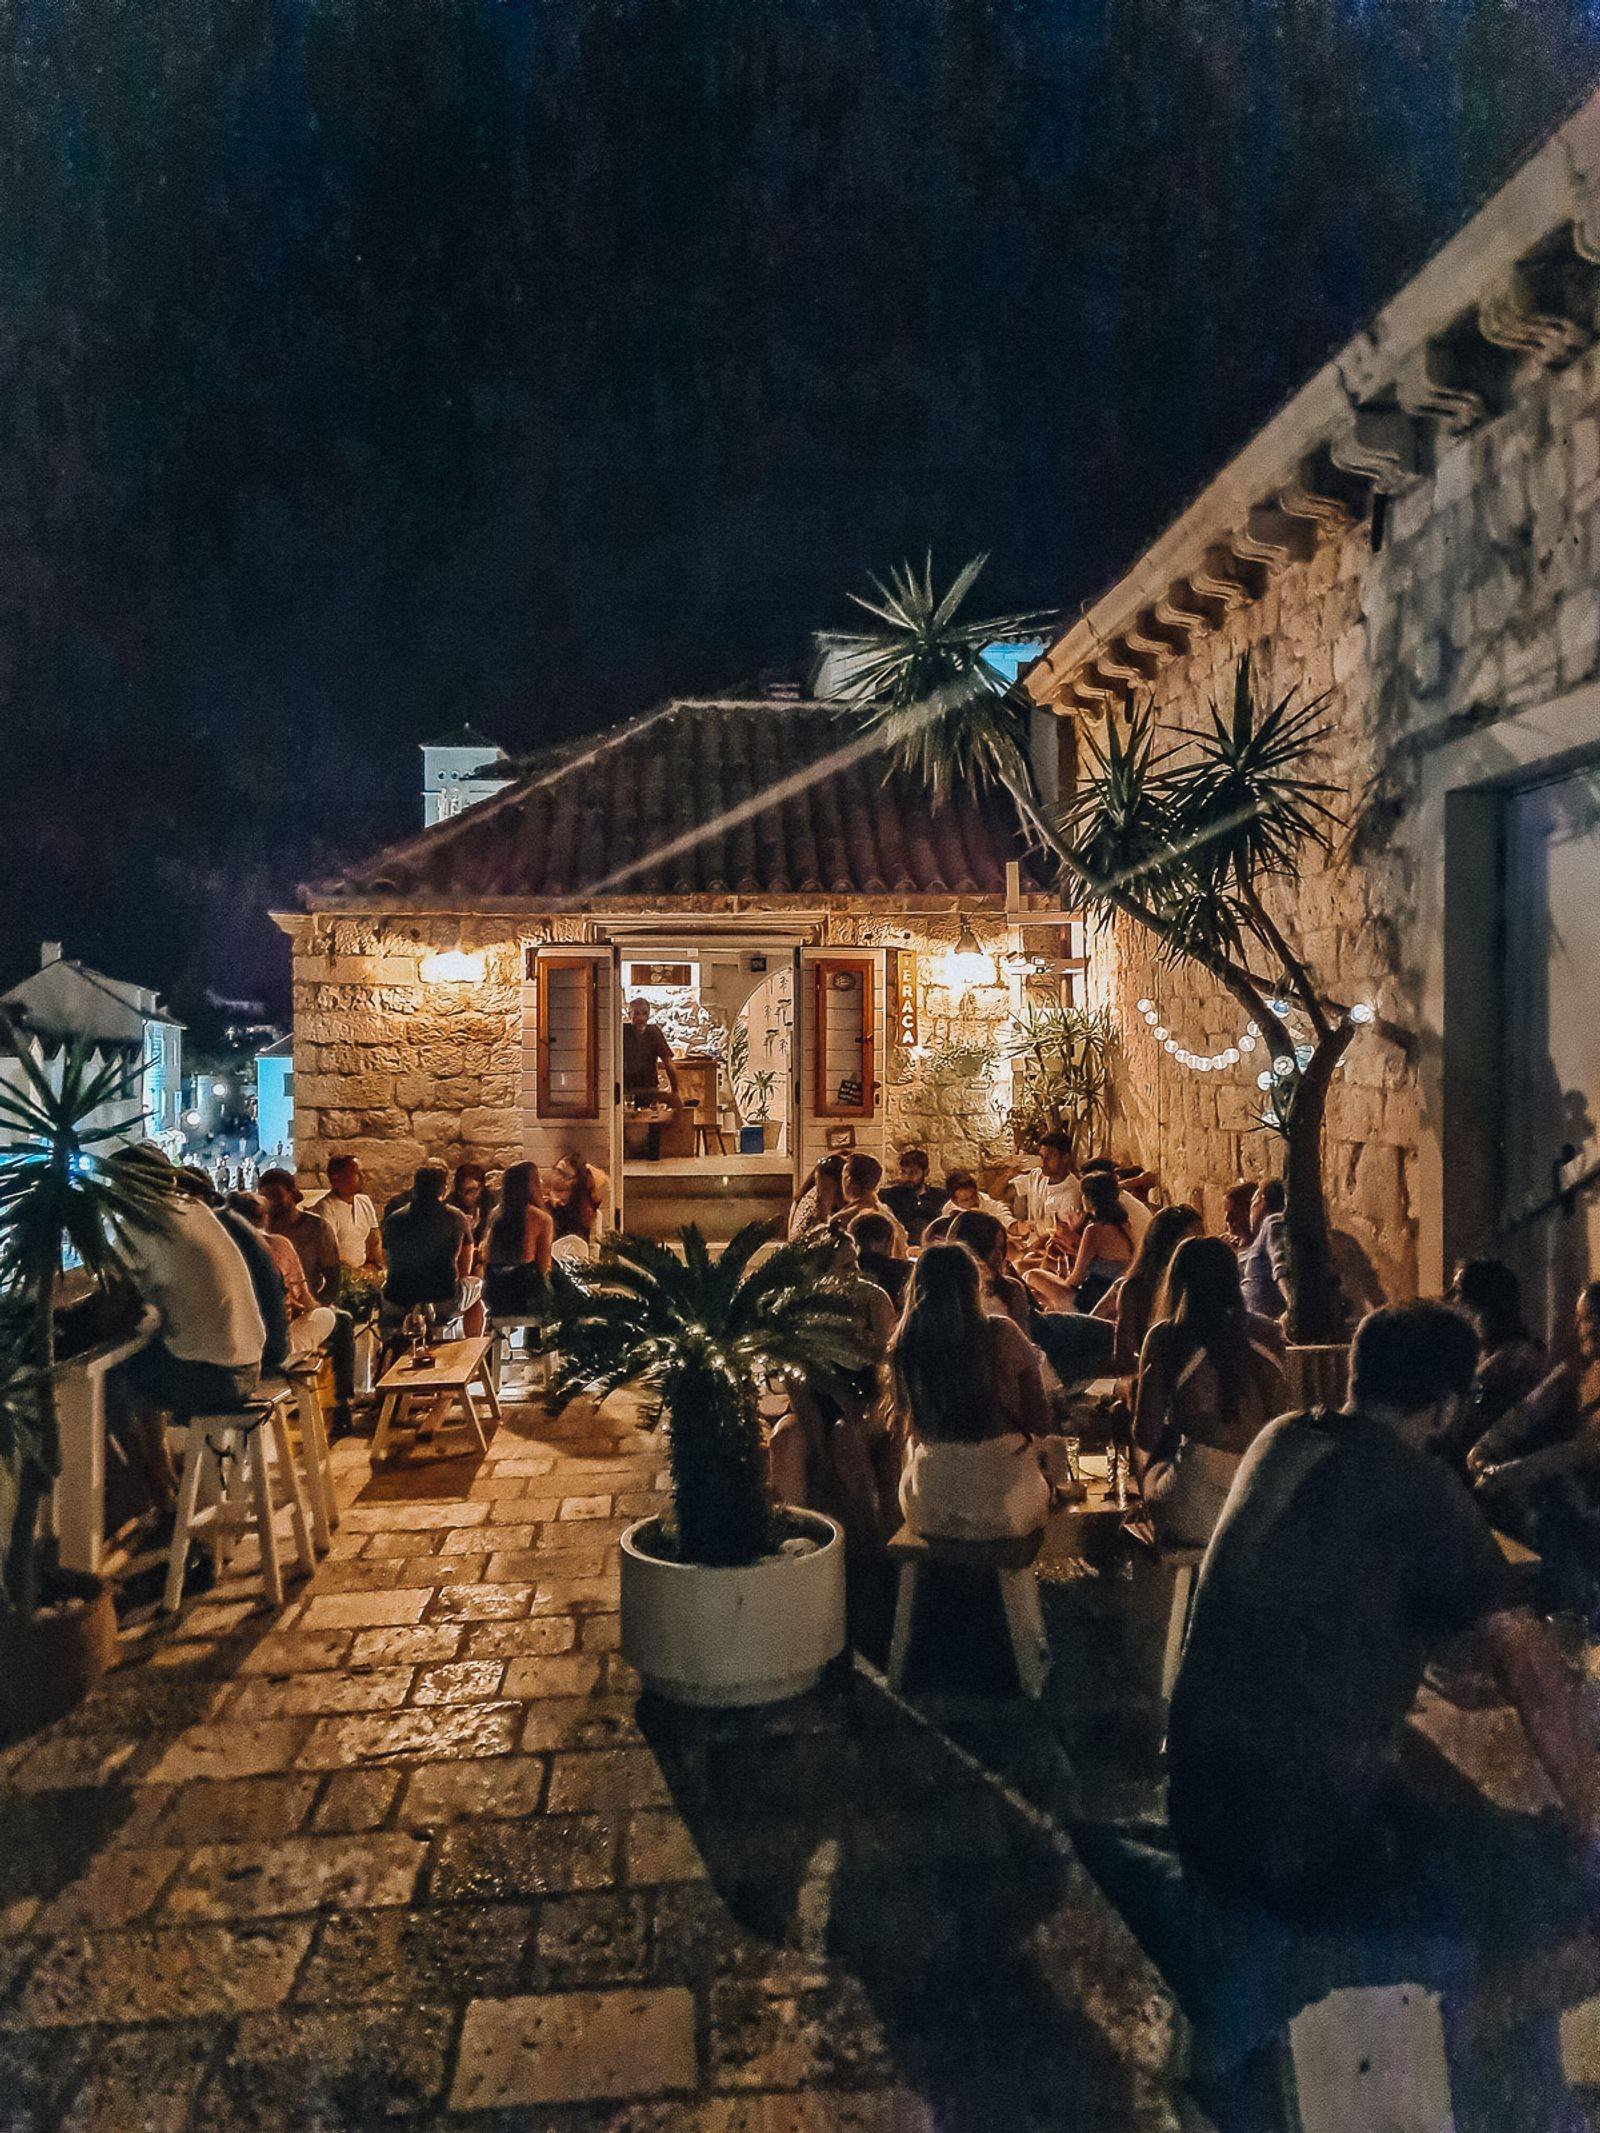 A night time shot of a stone building which is a bar and terrace with many people drinking in the low light